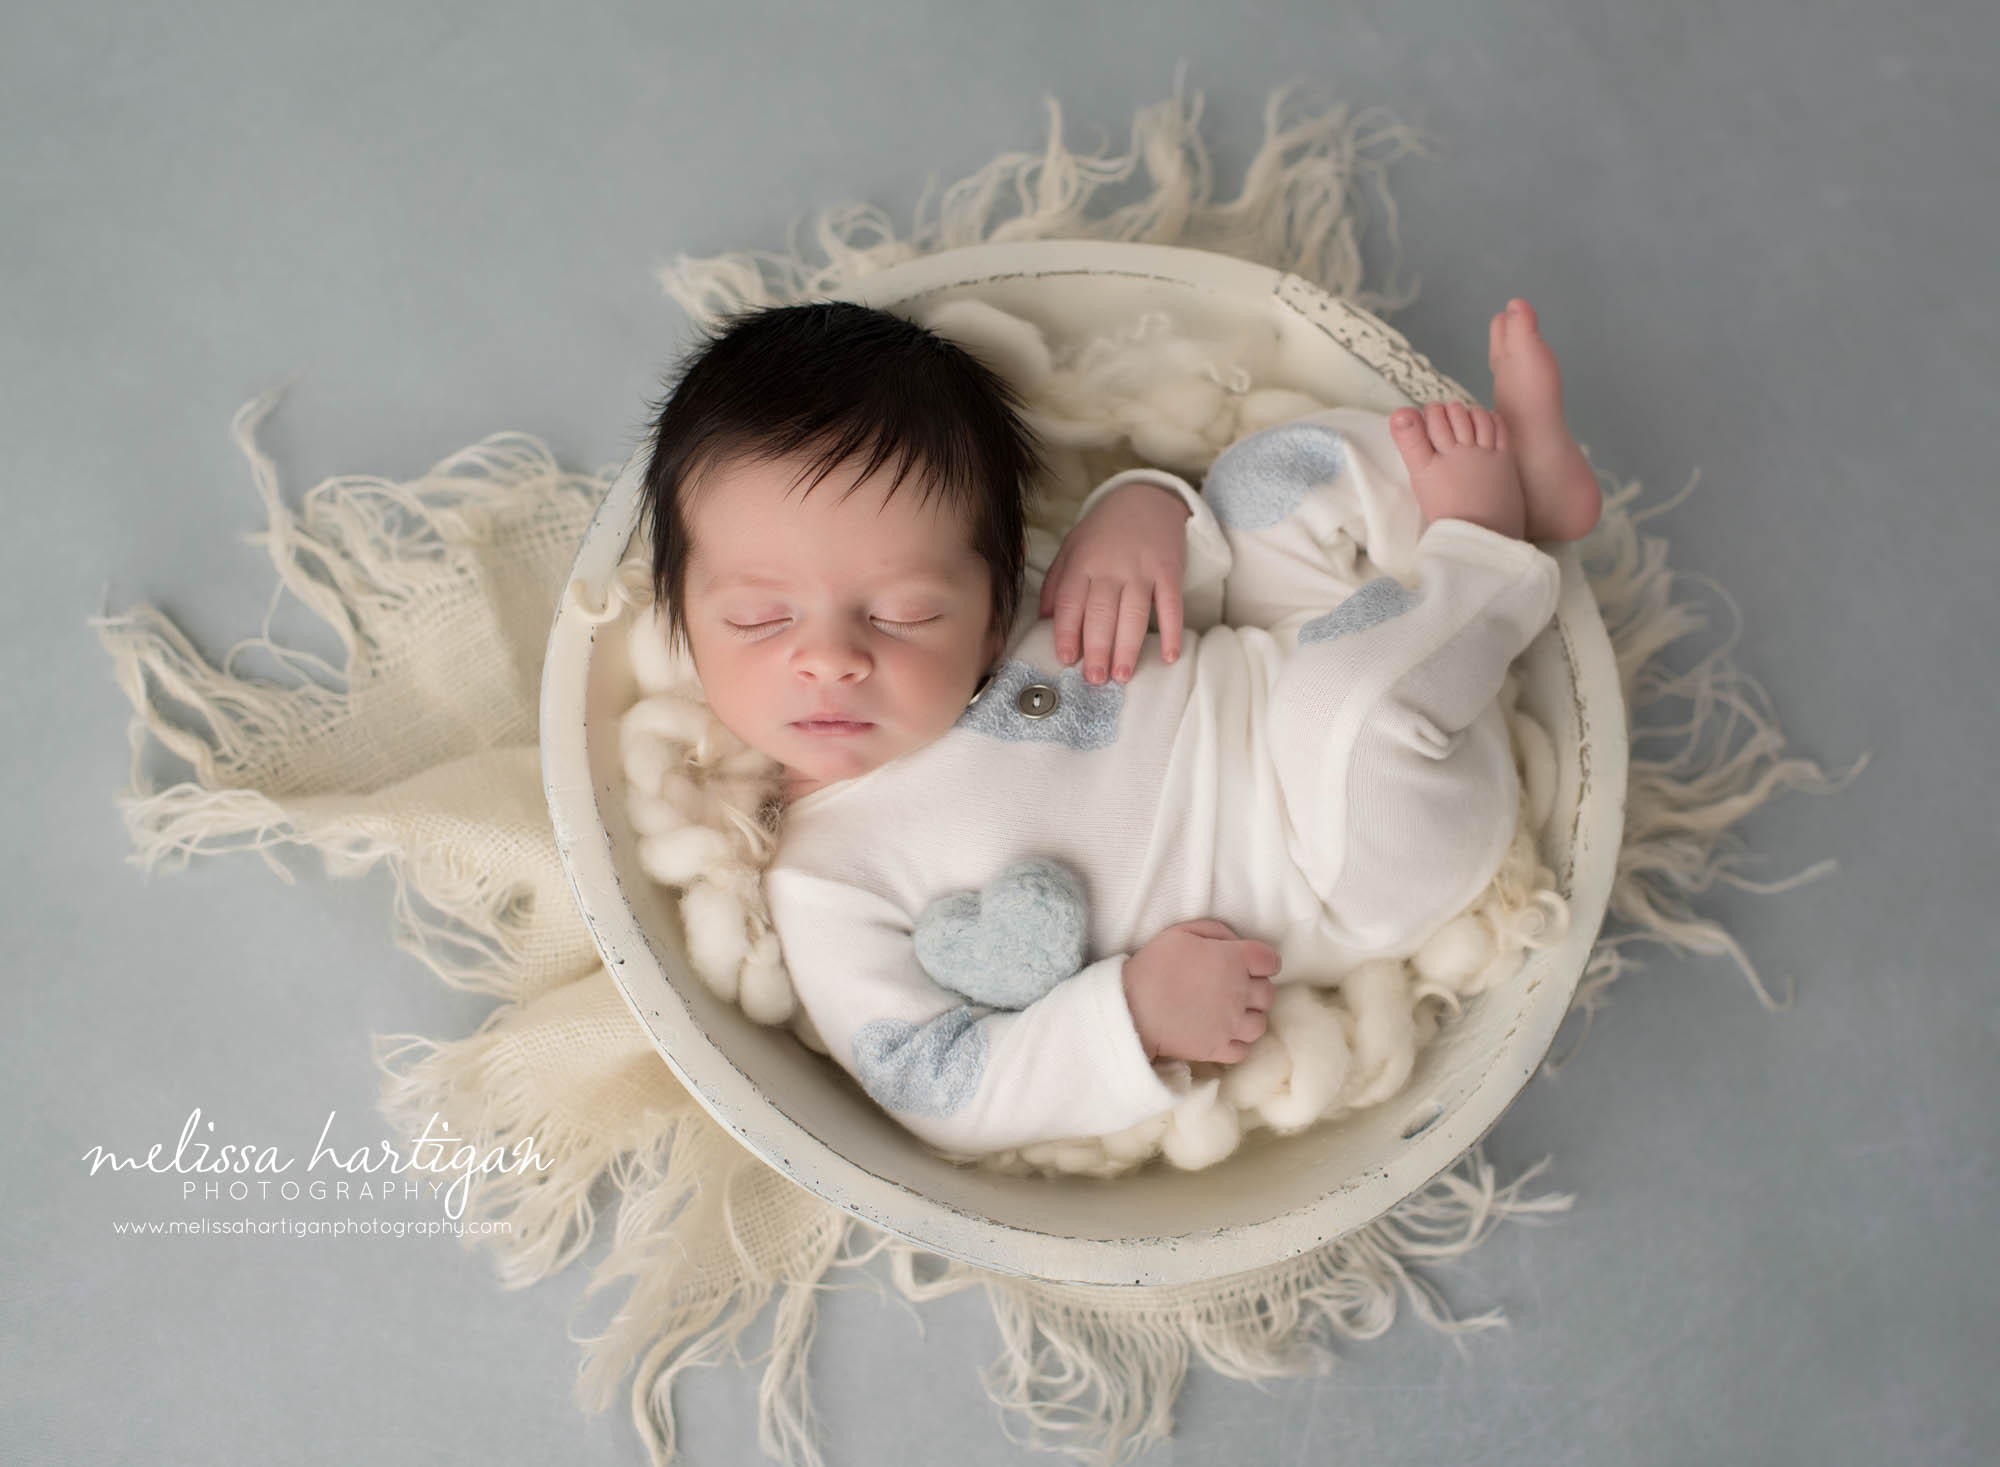 newborn baby boy posed in cream wooden bowl wearing white newborn boy outfit with gray felted heart prop